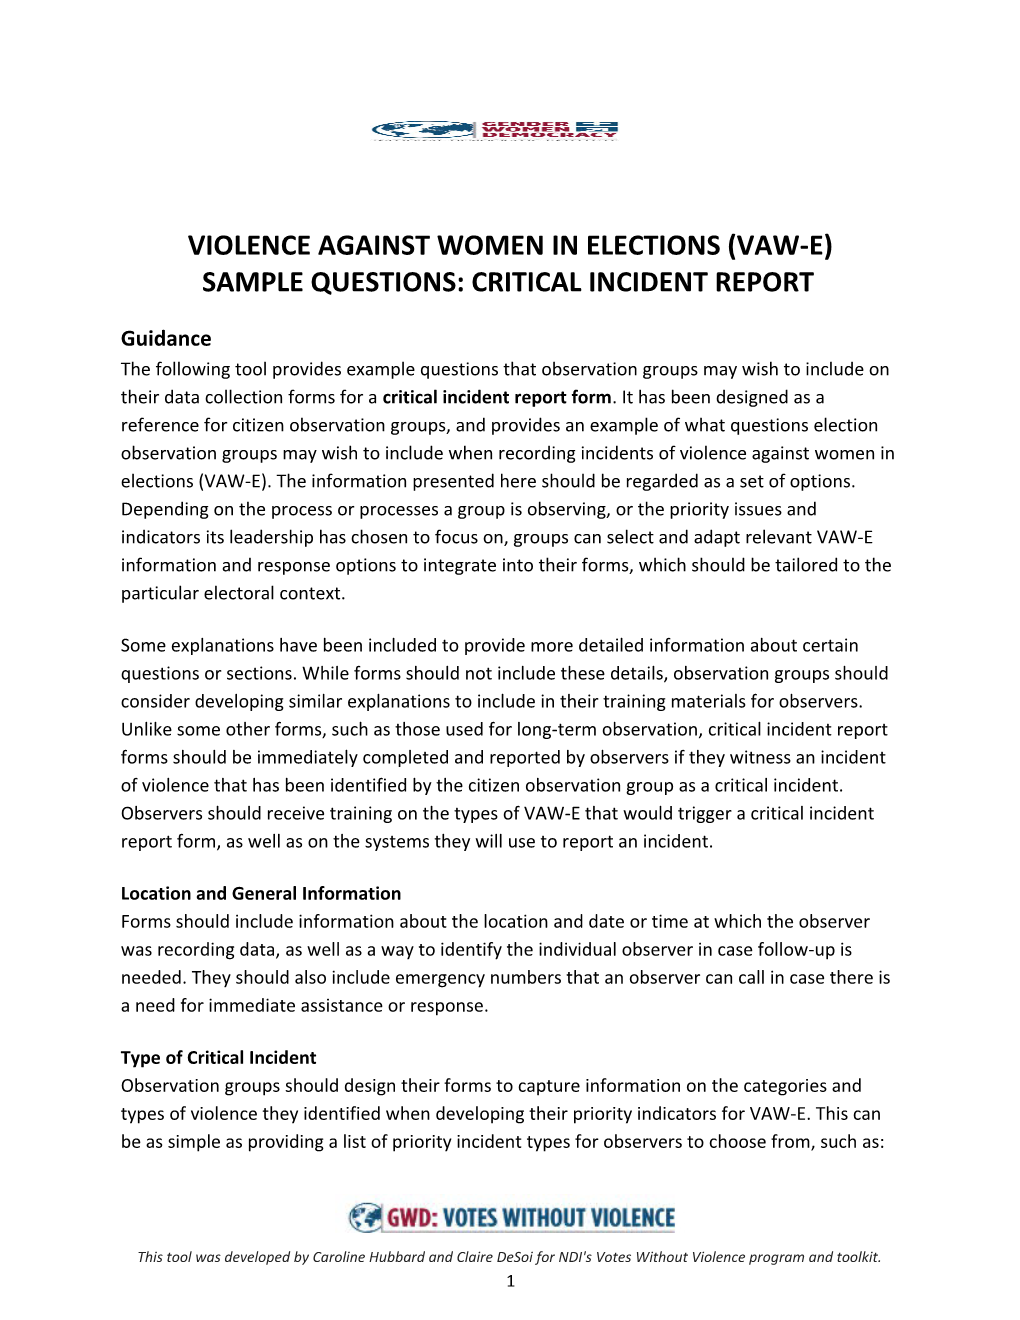 Violence Against Women in Elections (Vaw-E)